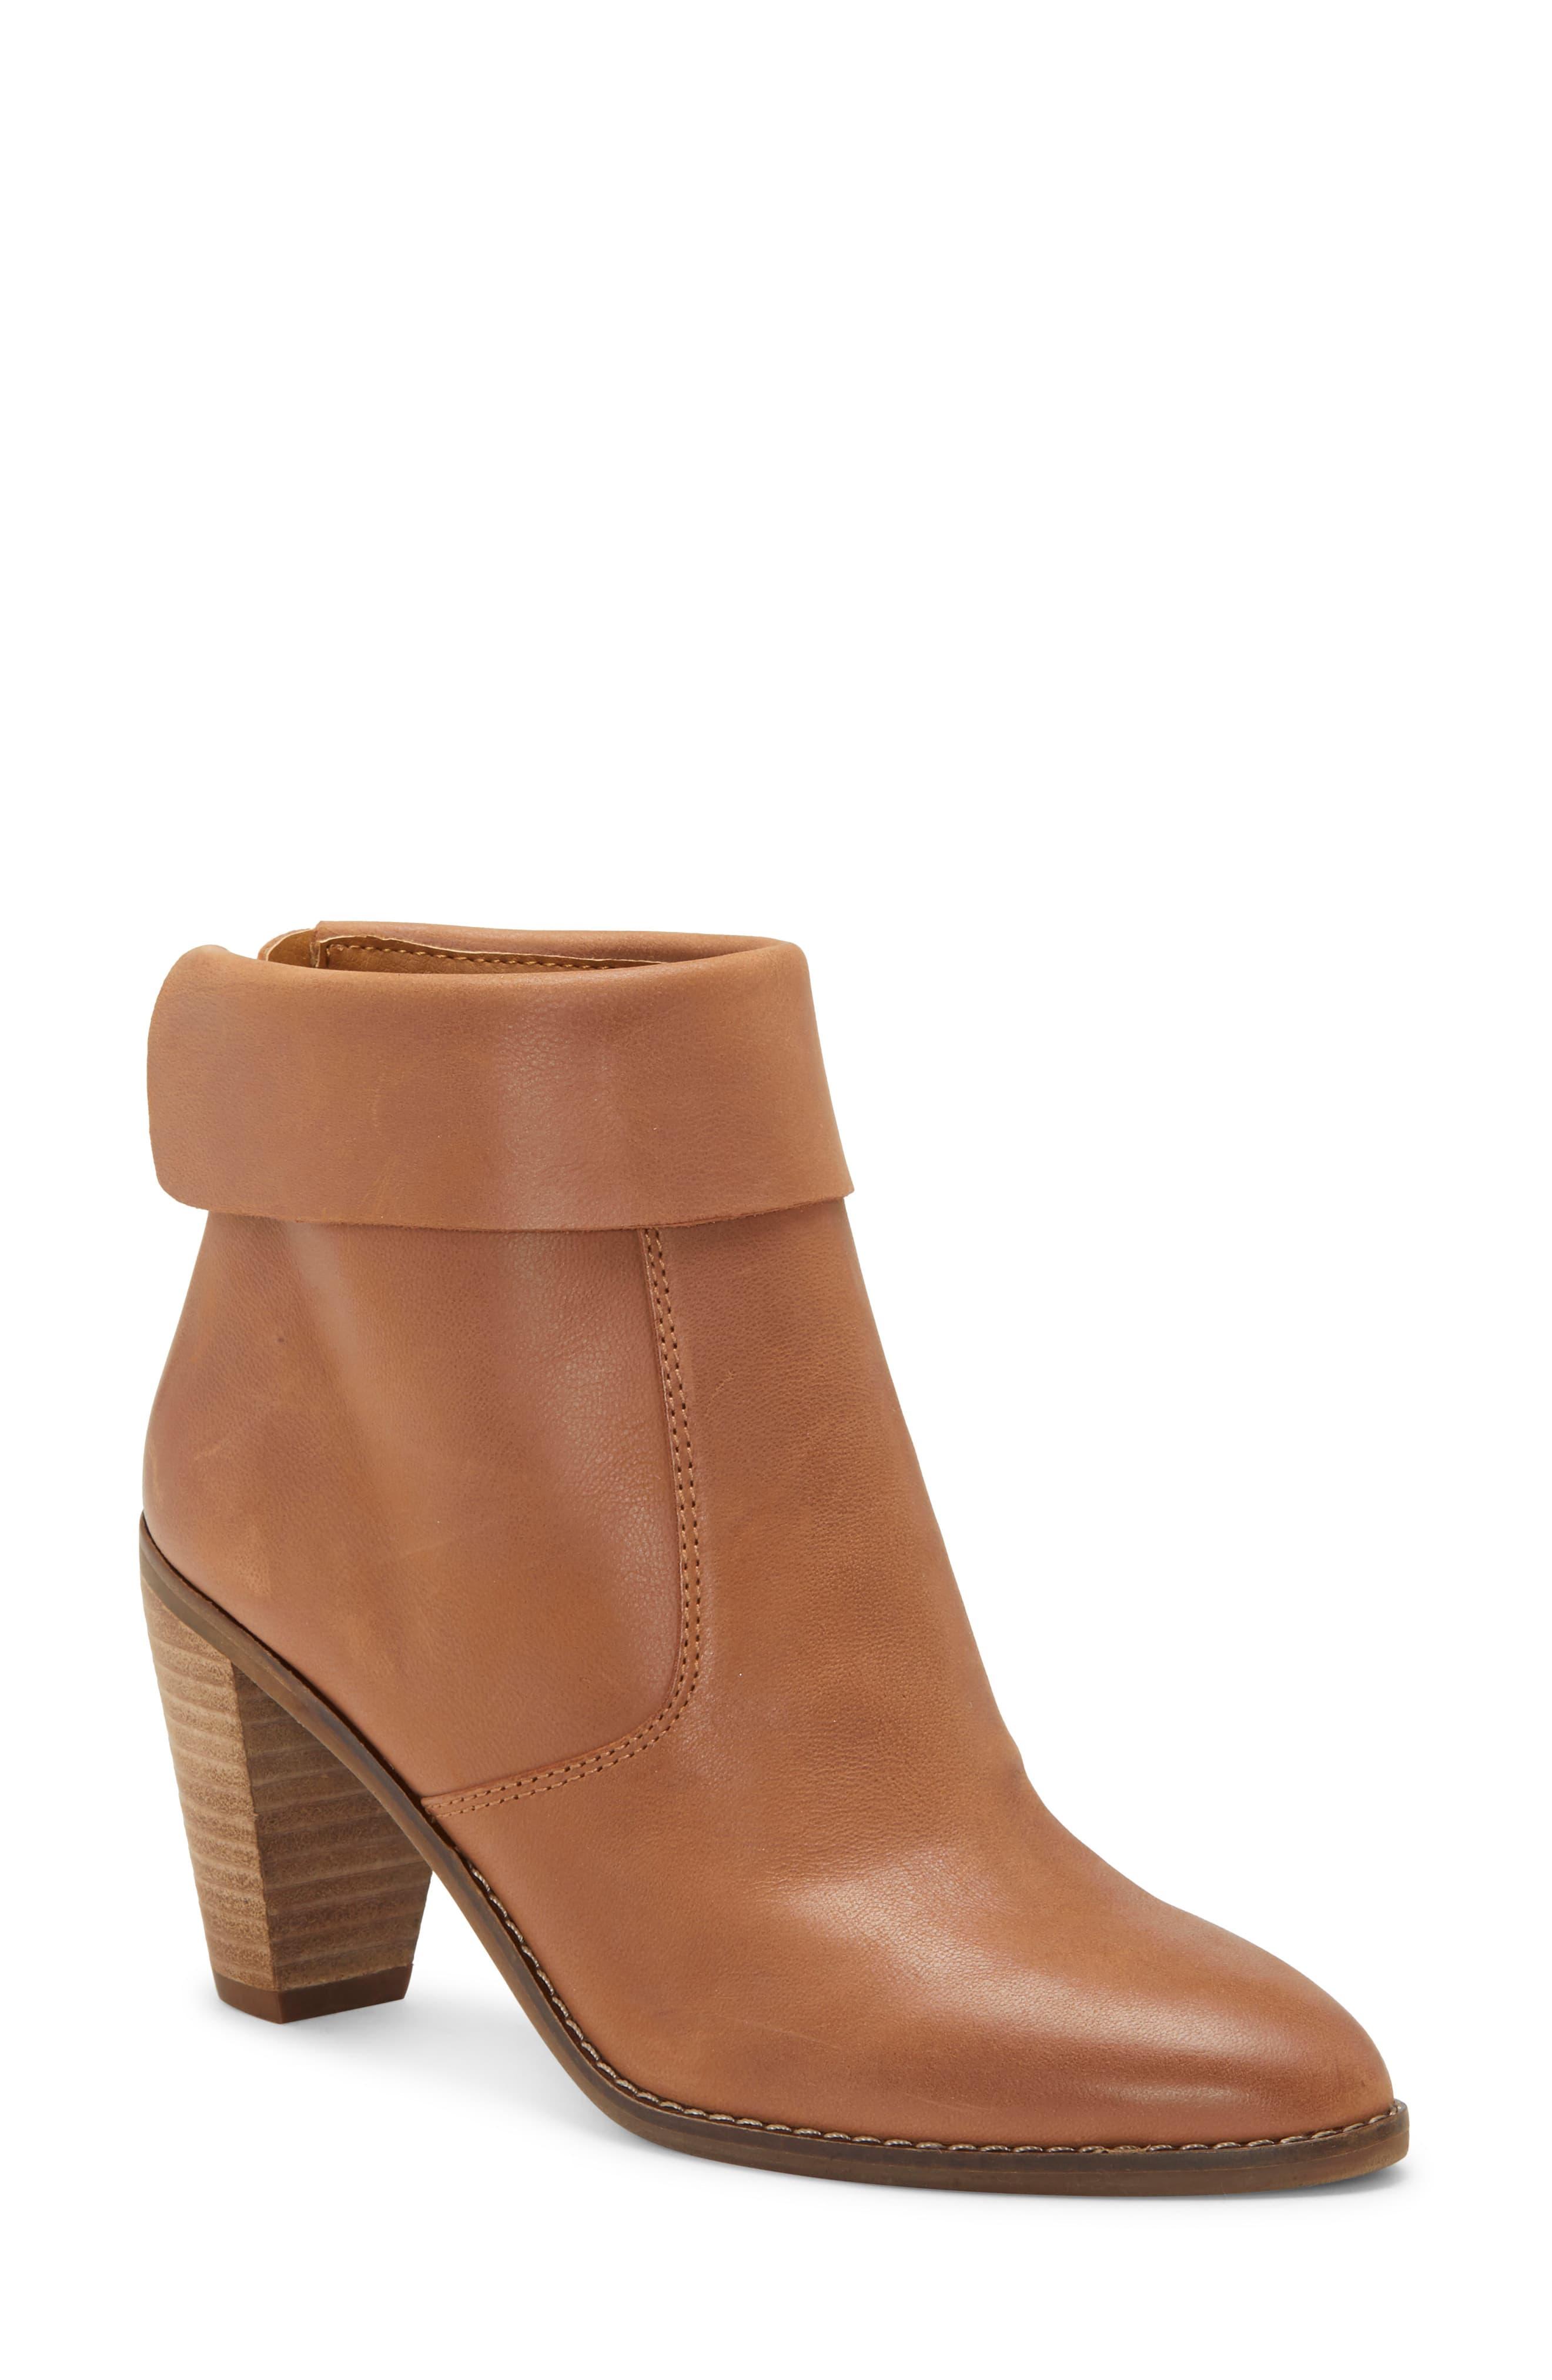 Lucky Brand Nycott Leather Bootie in Brown - Save 40% - Lyst